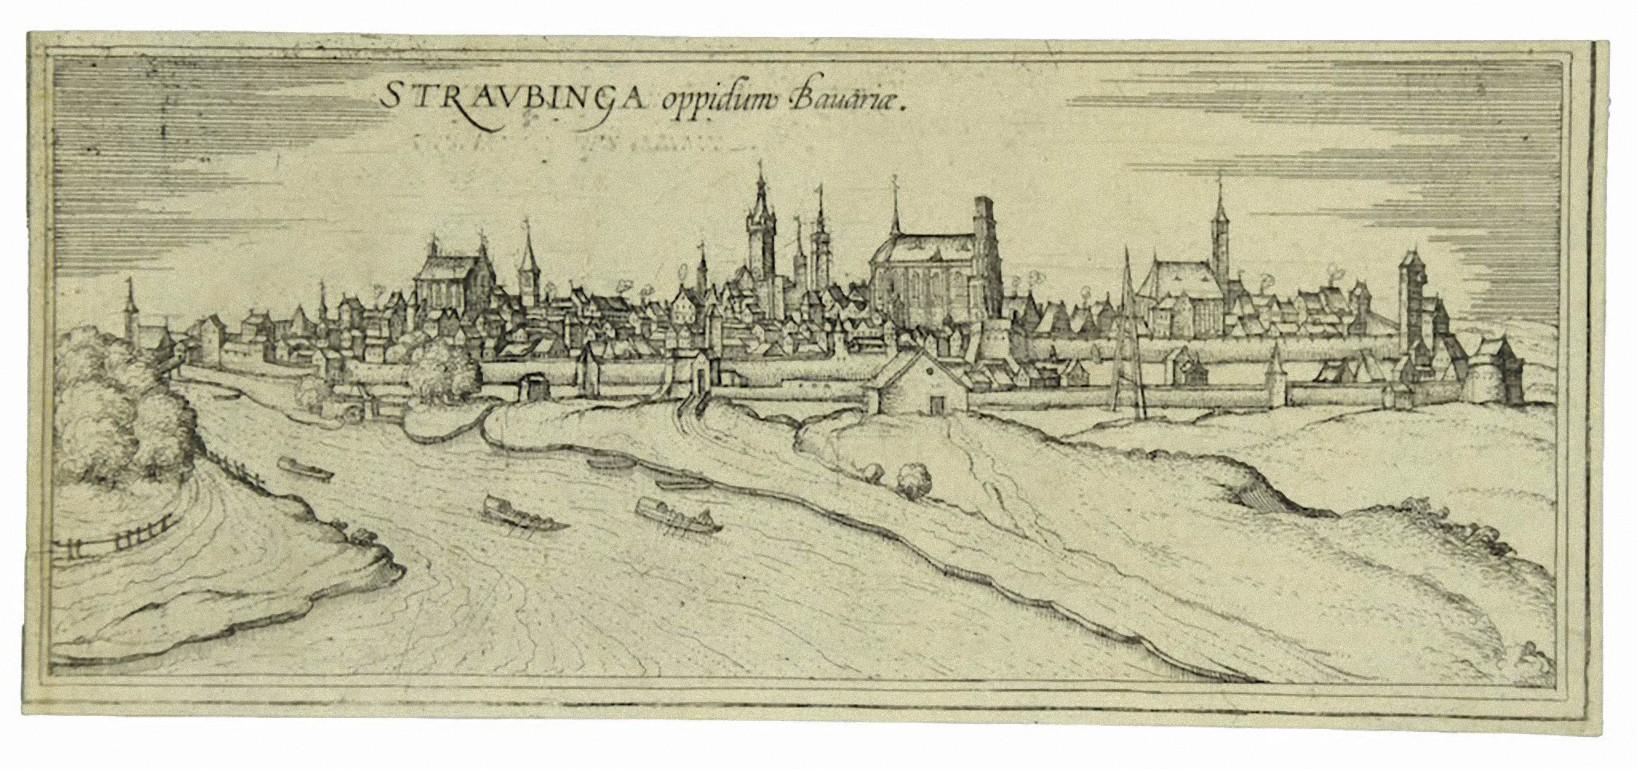 Frans Hogenberg Figurative Print - View of Straubing - Etching by G. Braun and F. Hogenberg - Late 16th Century